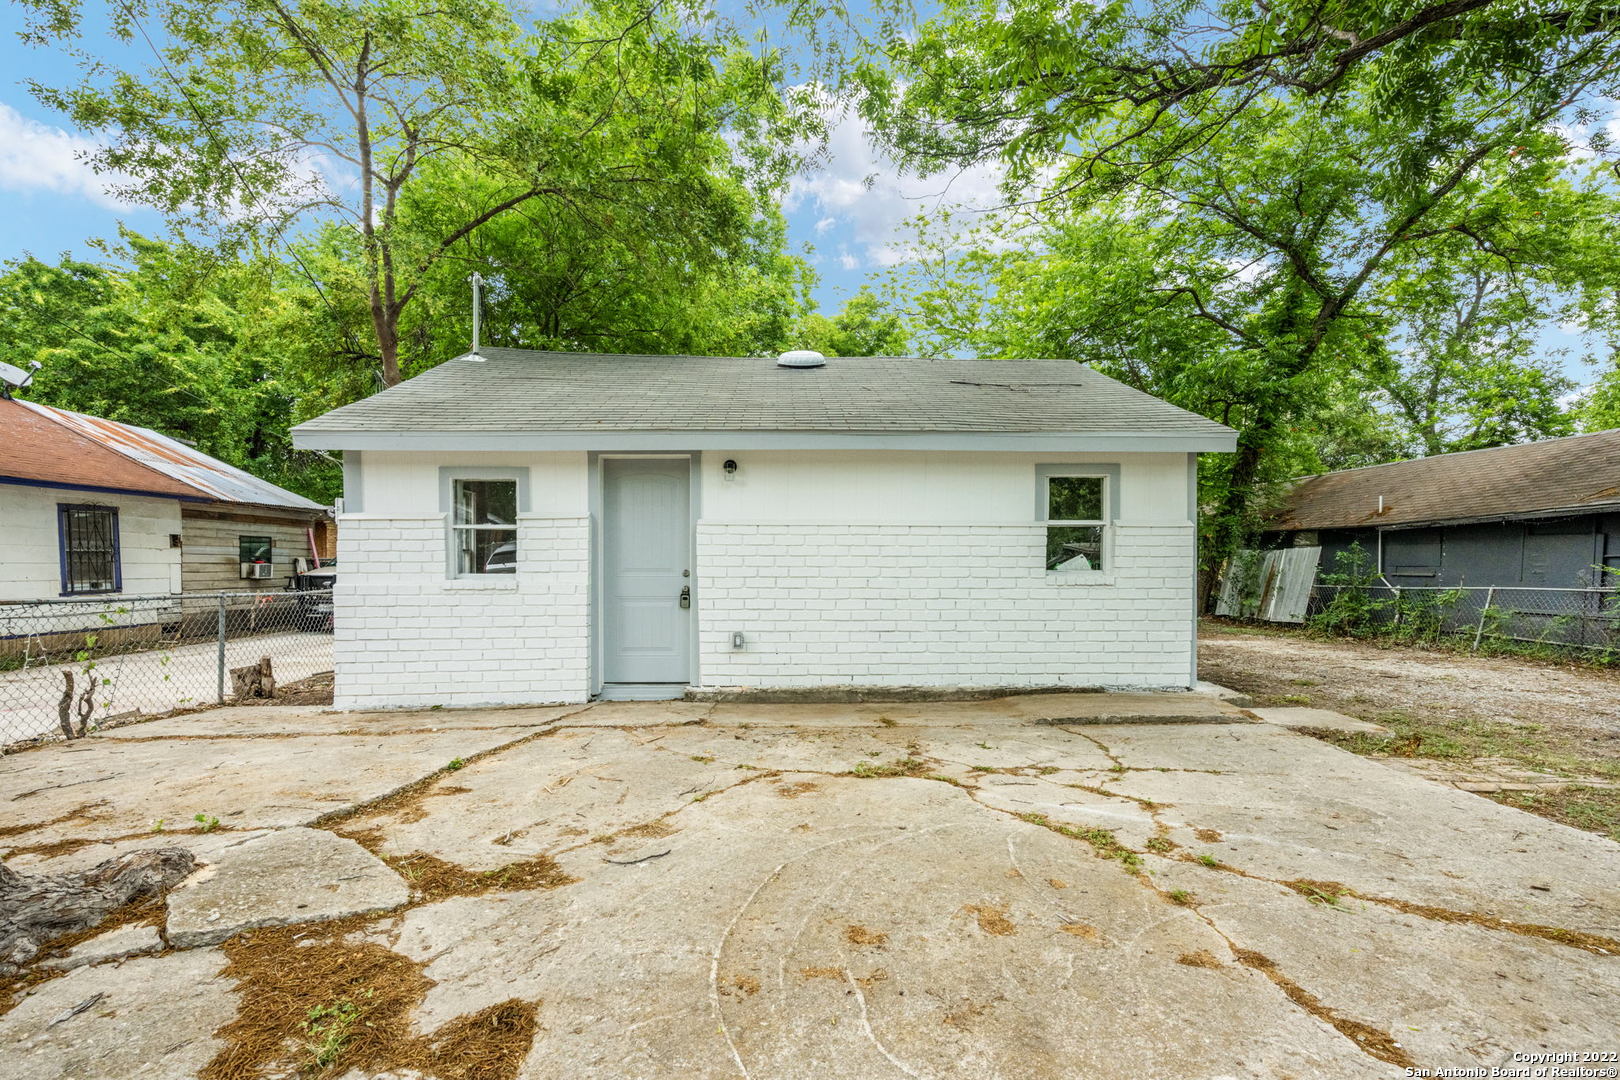 Renovated property close to downtown, with updated electrical. This home has 2 full bedrooms plus a loft area that can be used as office pr play area. Property is ready for a new family to make this their new home!